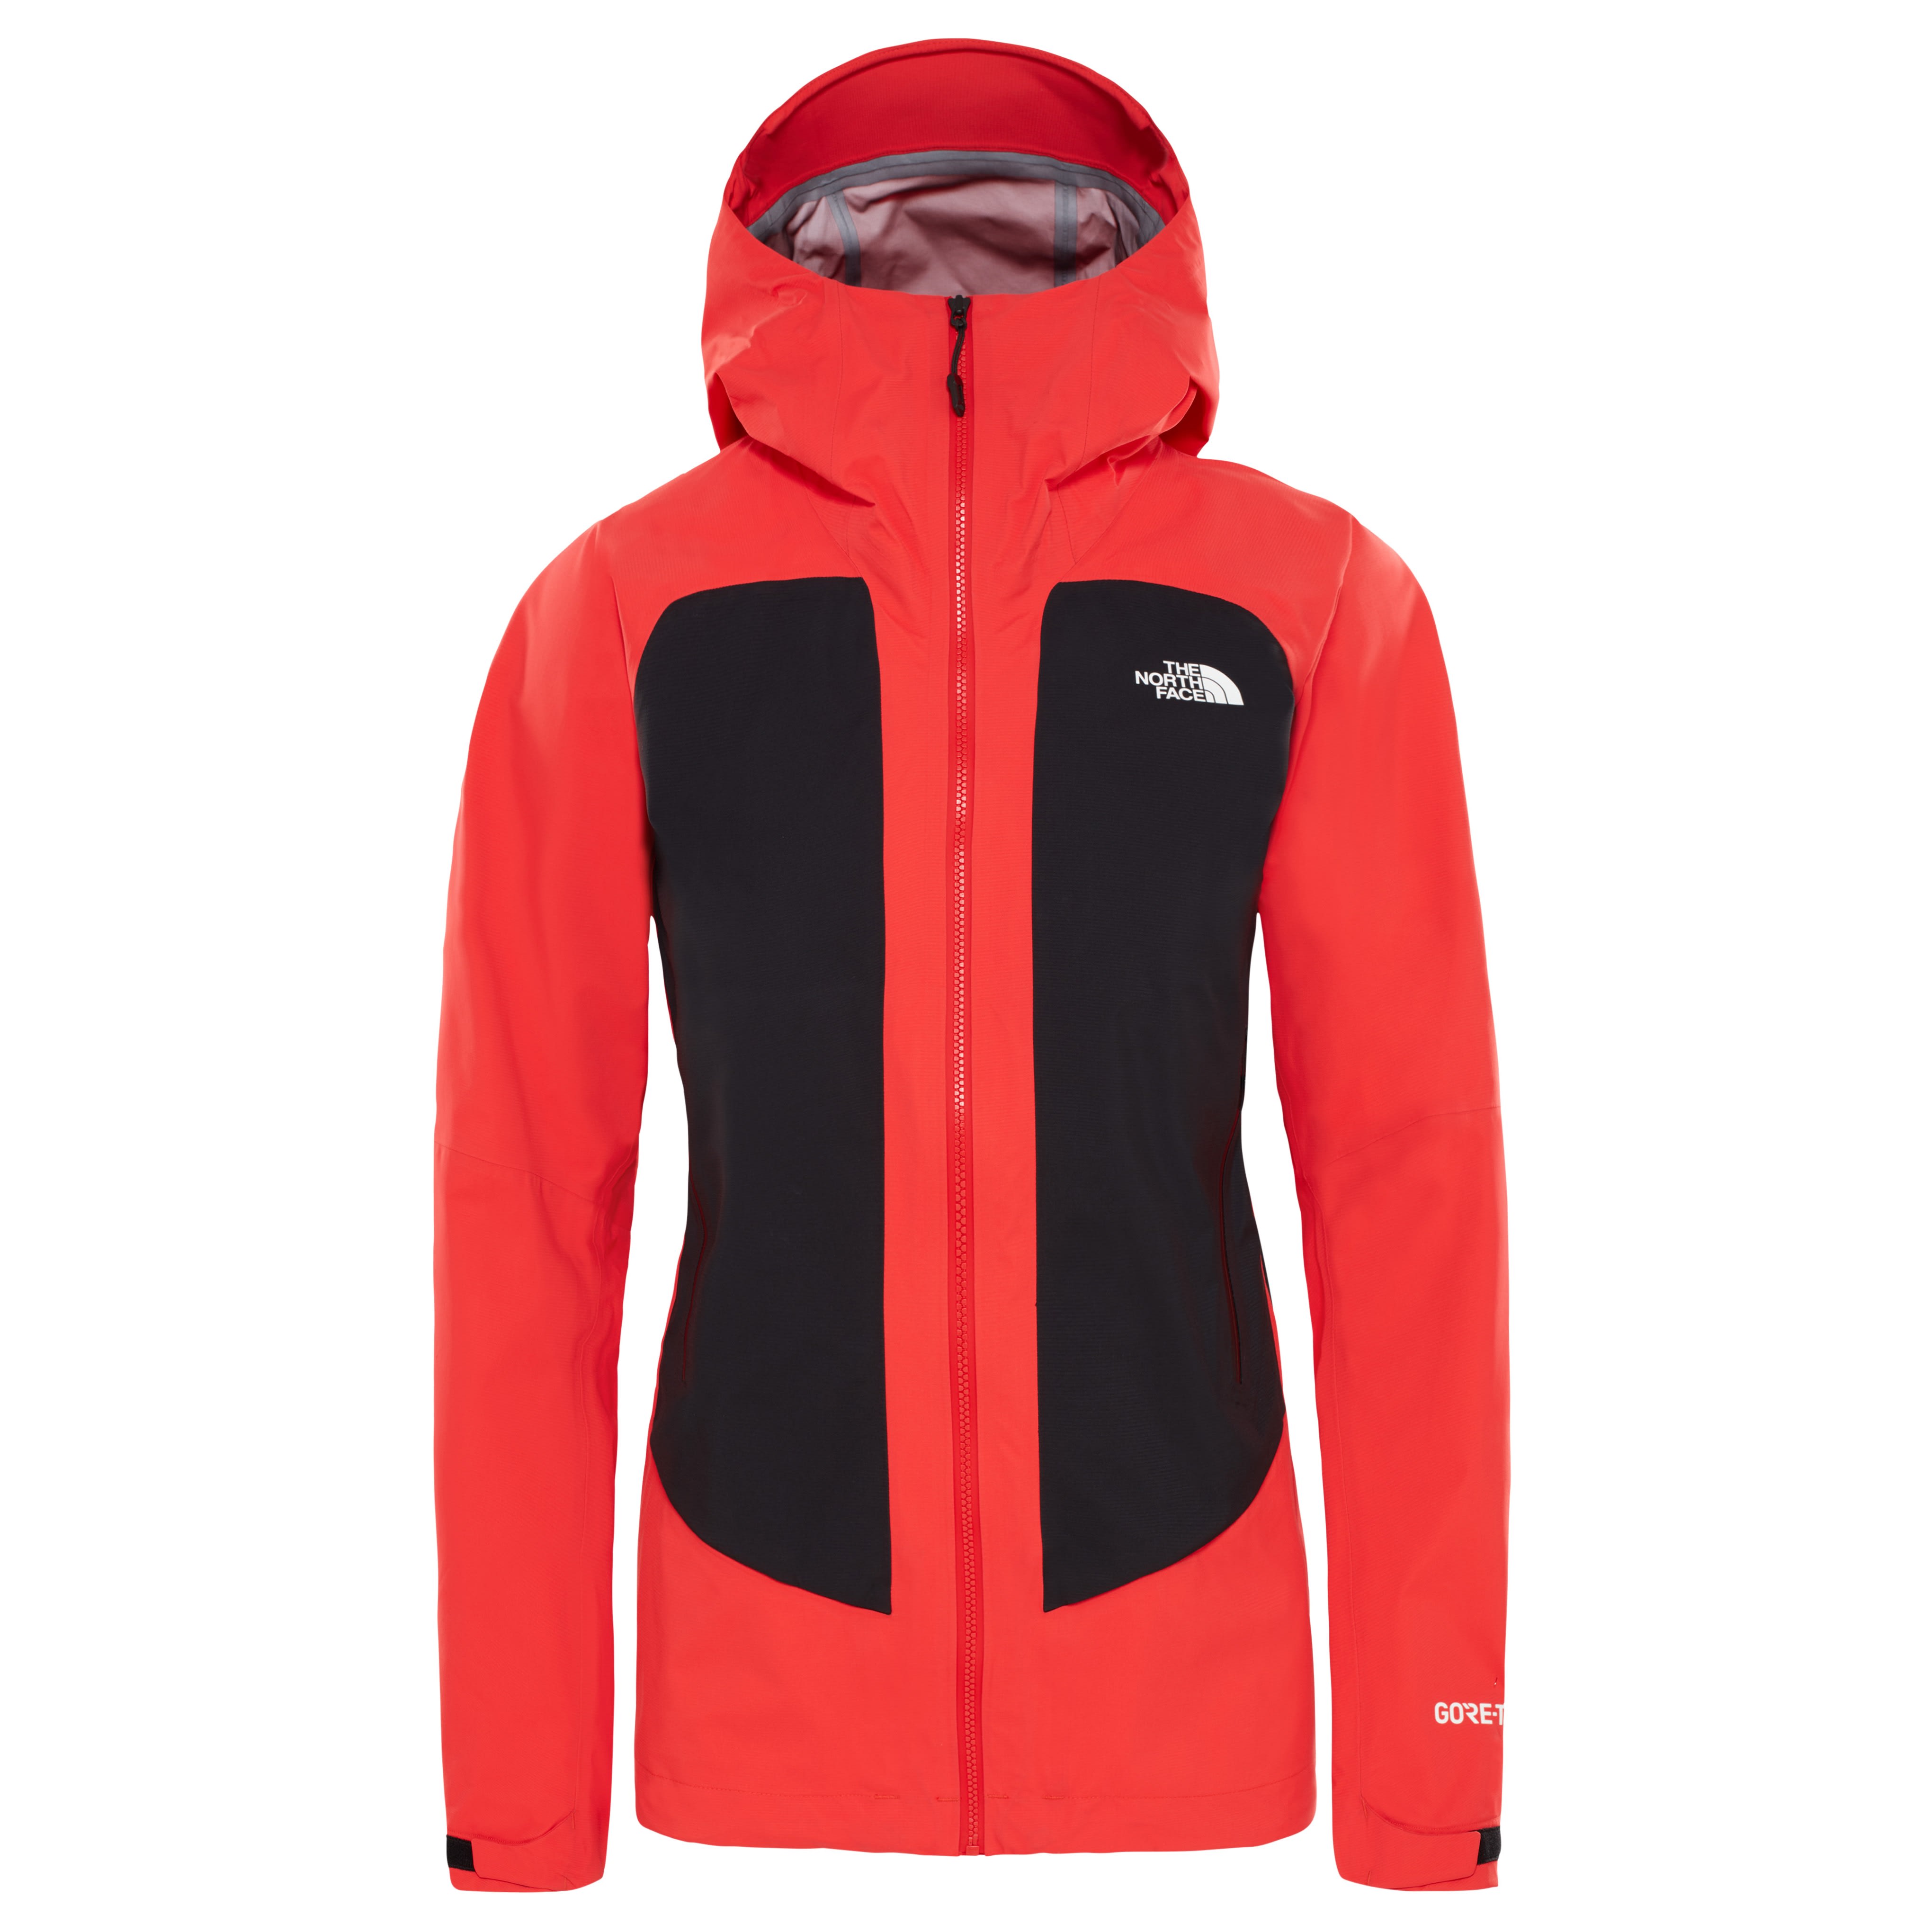 north face shell jacket women's